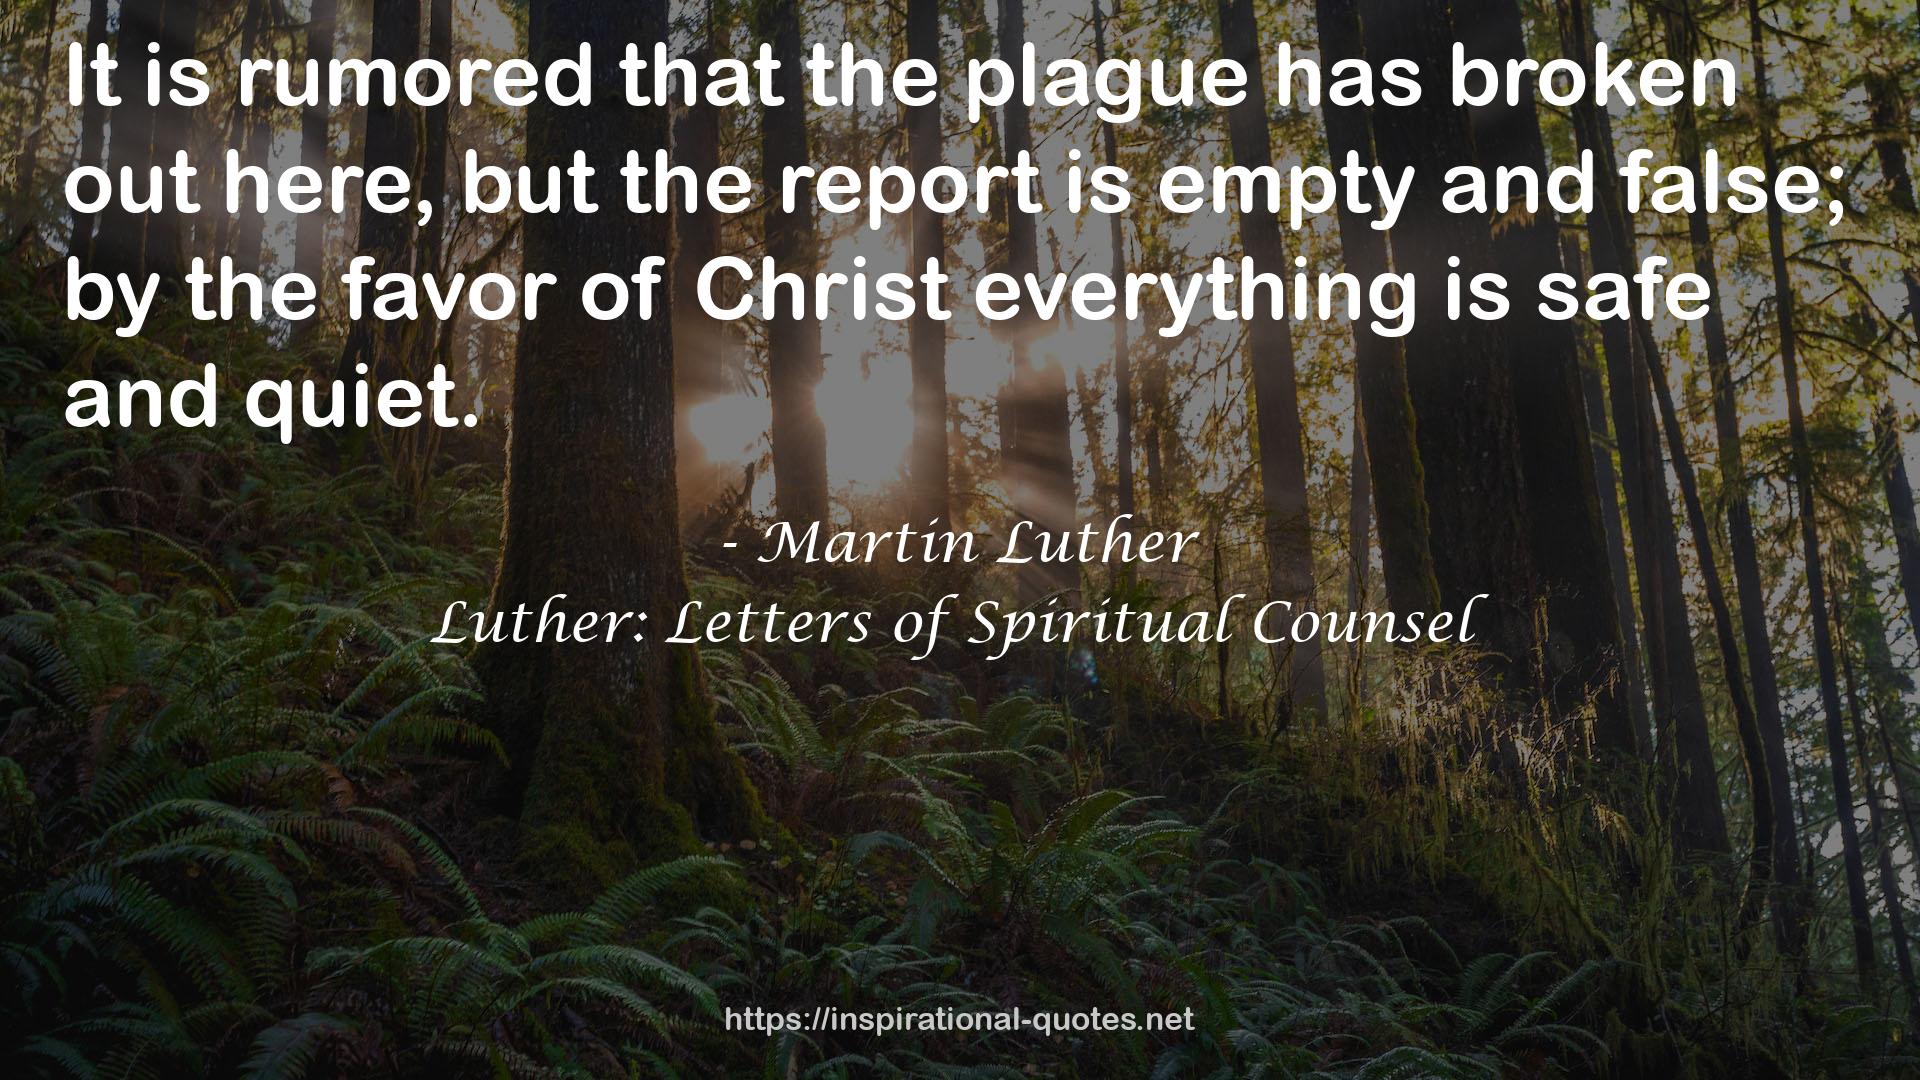 Luther: Letters of Spiritual Counsel QUOTES